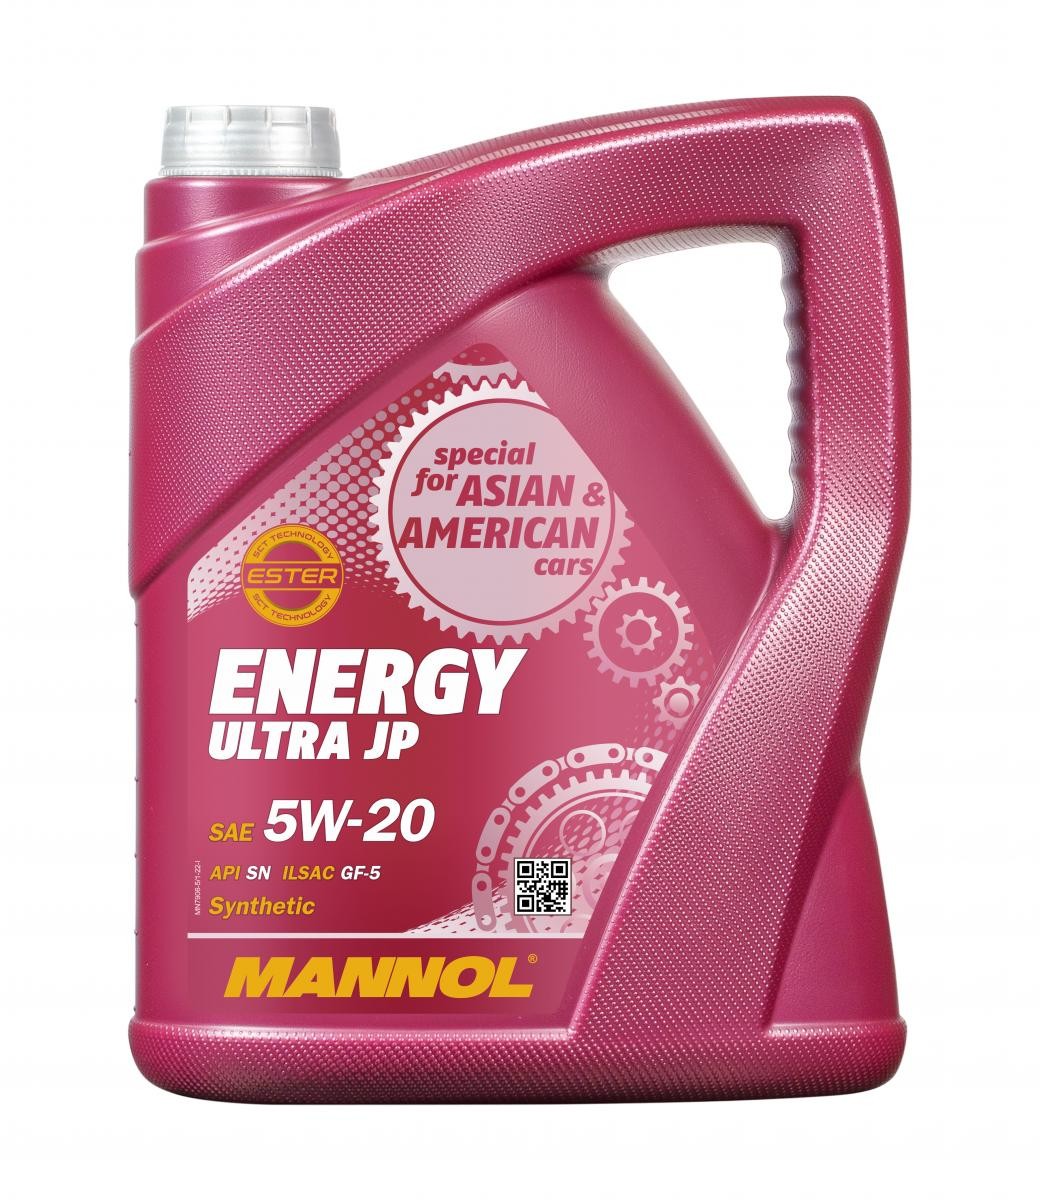 MANNOL Energy, Ultra JP MN7906-5 Engine oil 5W-20, 5l, Synthetic Oil